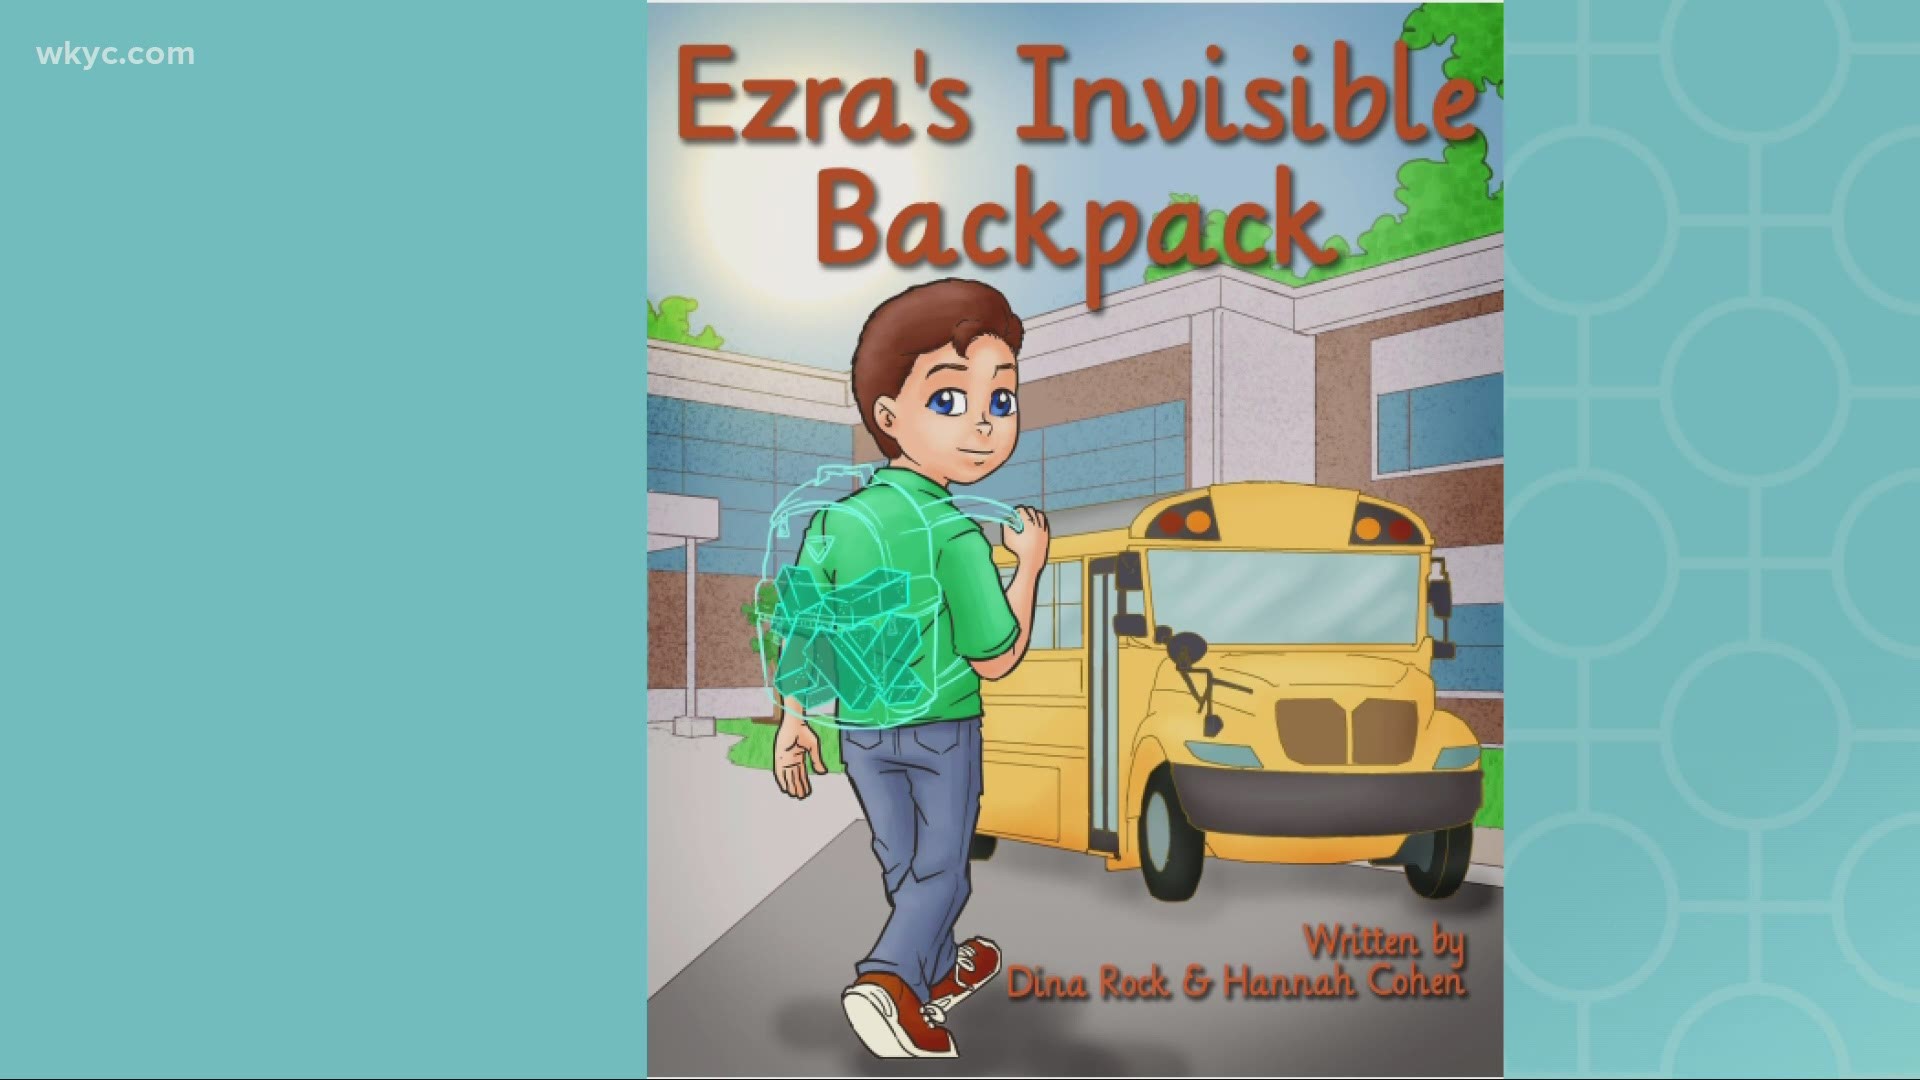 The real-life story behind 'Ezra's Invisible Backpack' and how the new book helps detail the daily struggles we each experience.